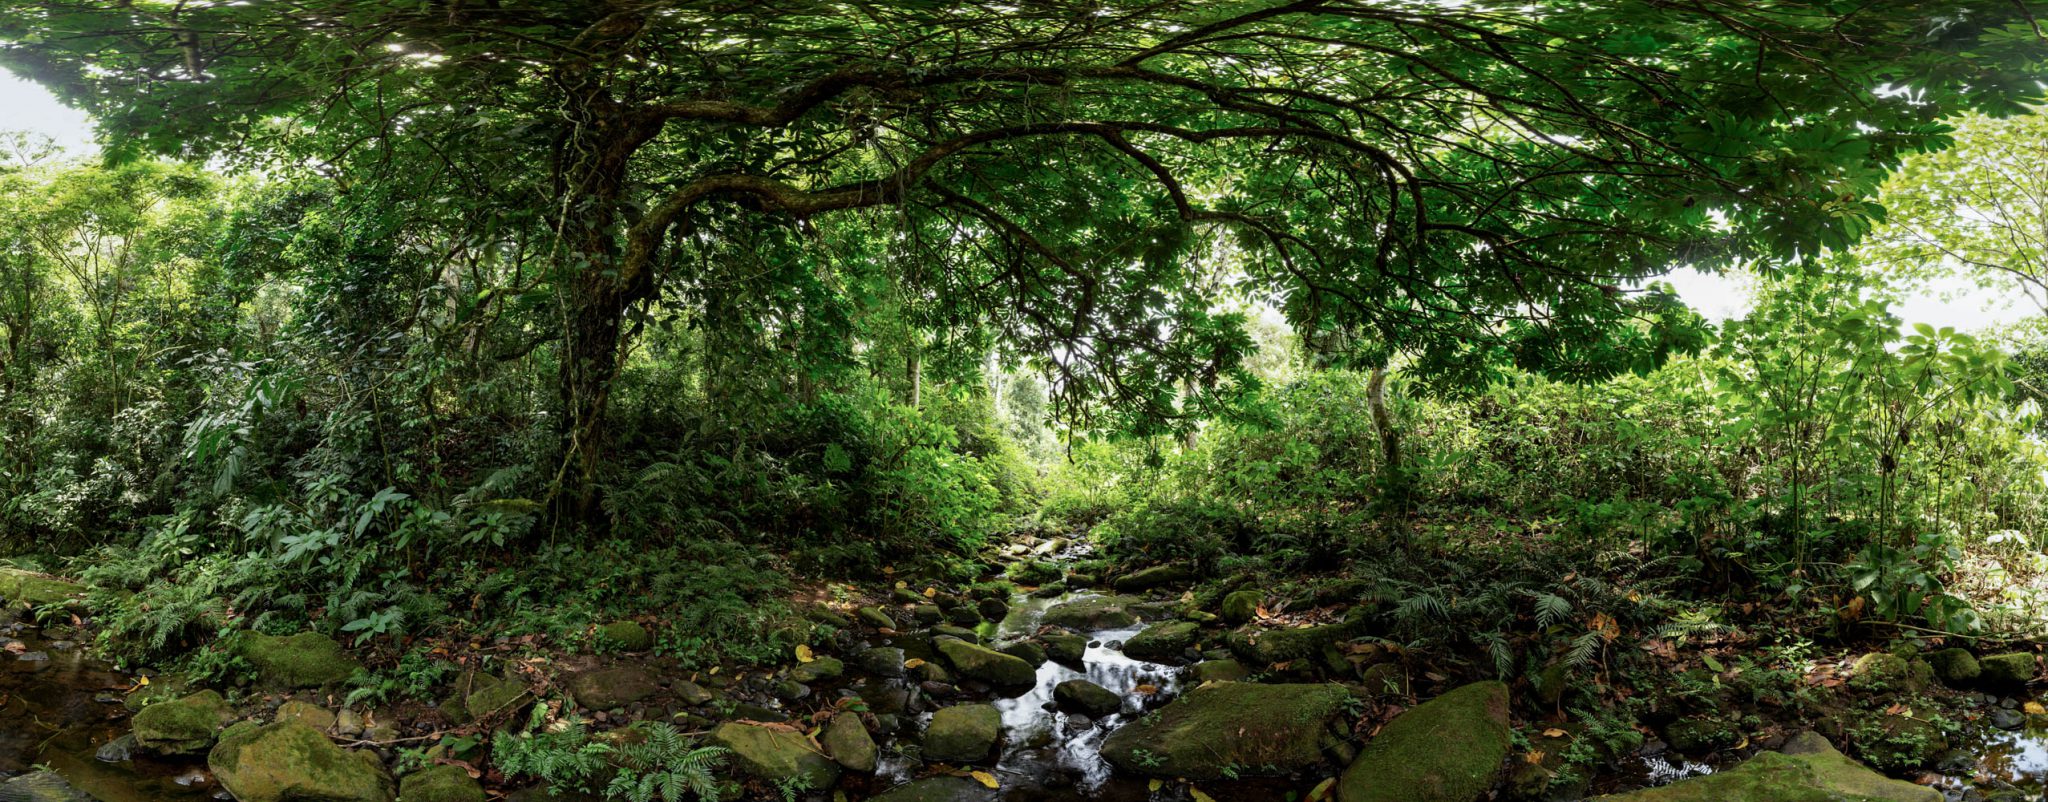 360 Panoramic Photograph of a green jungle or forest, with a small stream running over mossy rocks, from an environment capture session.